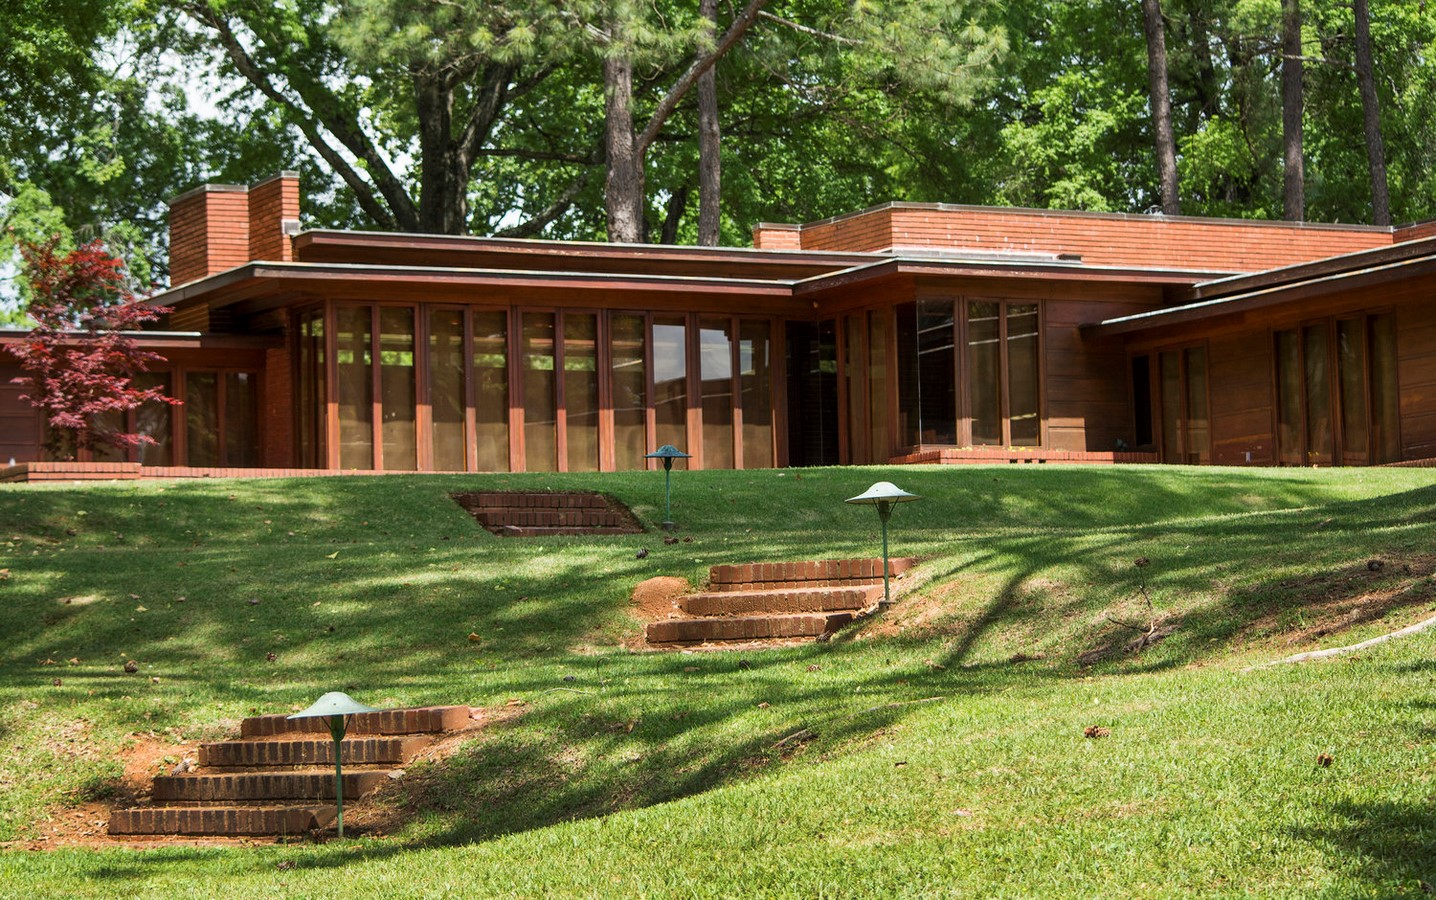 A4181-An-overview-of-Usonian-architecture-Image9.jpg